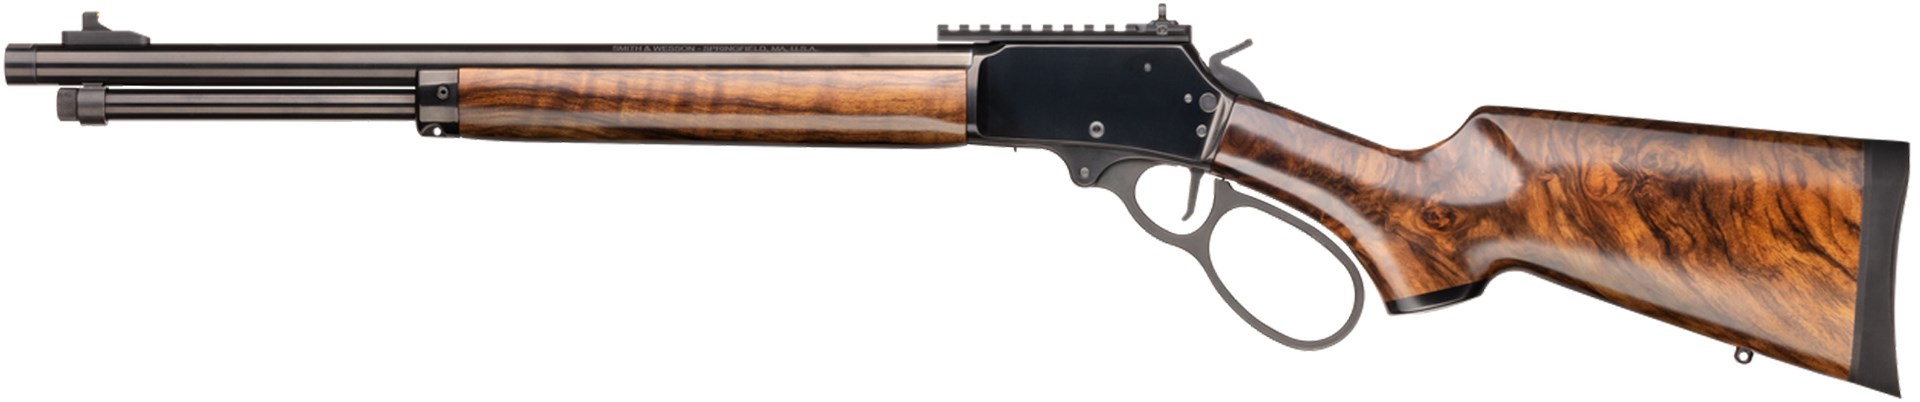 smith & wesson 1854 new lever-action rifle wood stock walnut swirl figure gloss finish blued steel on white background